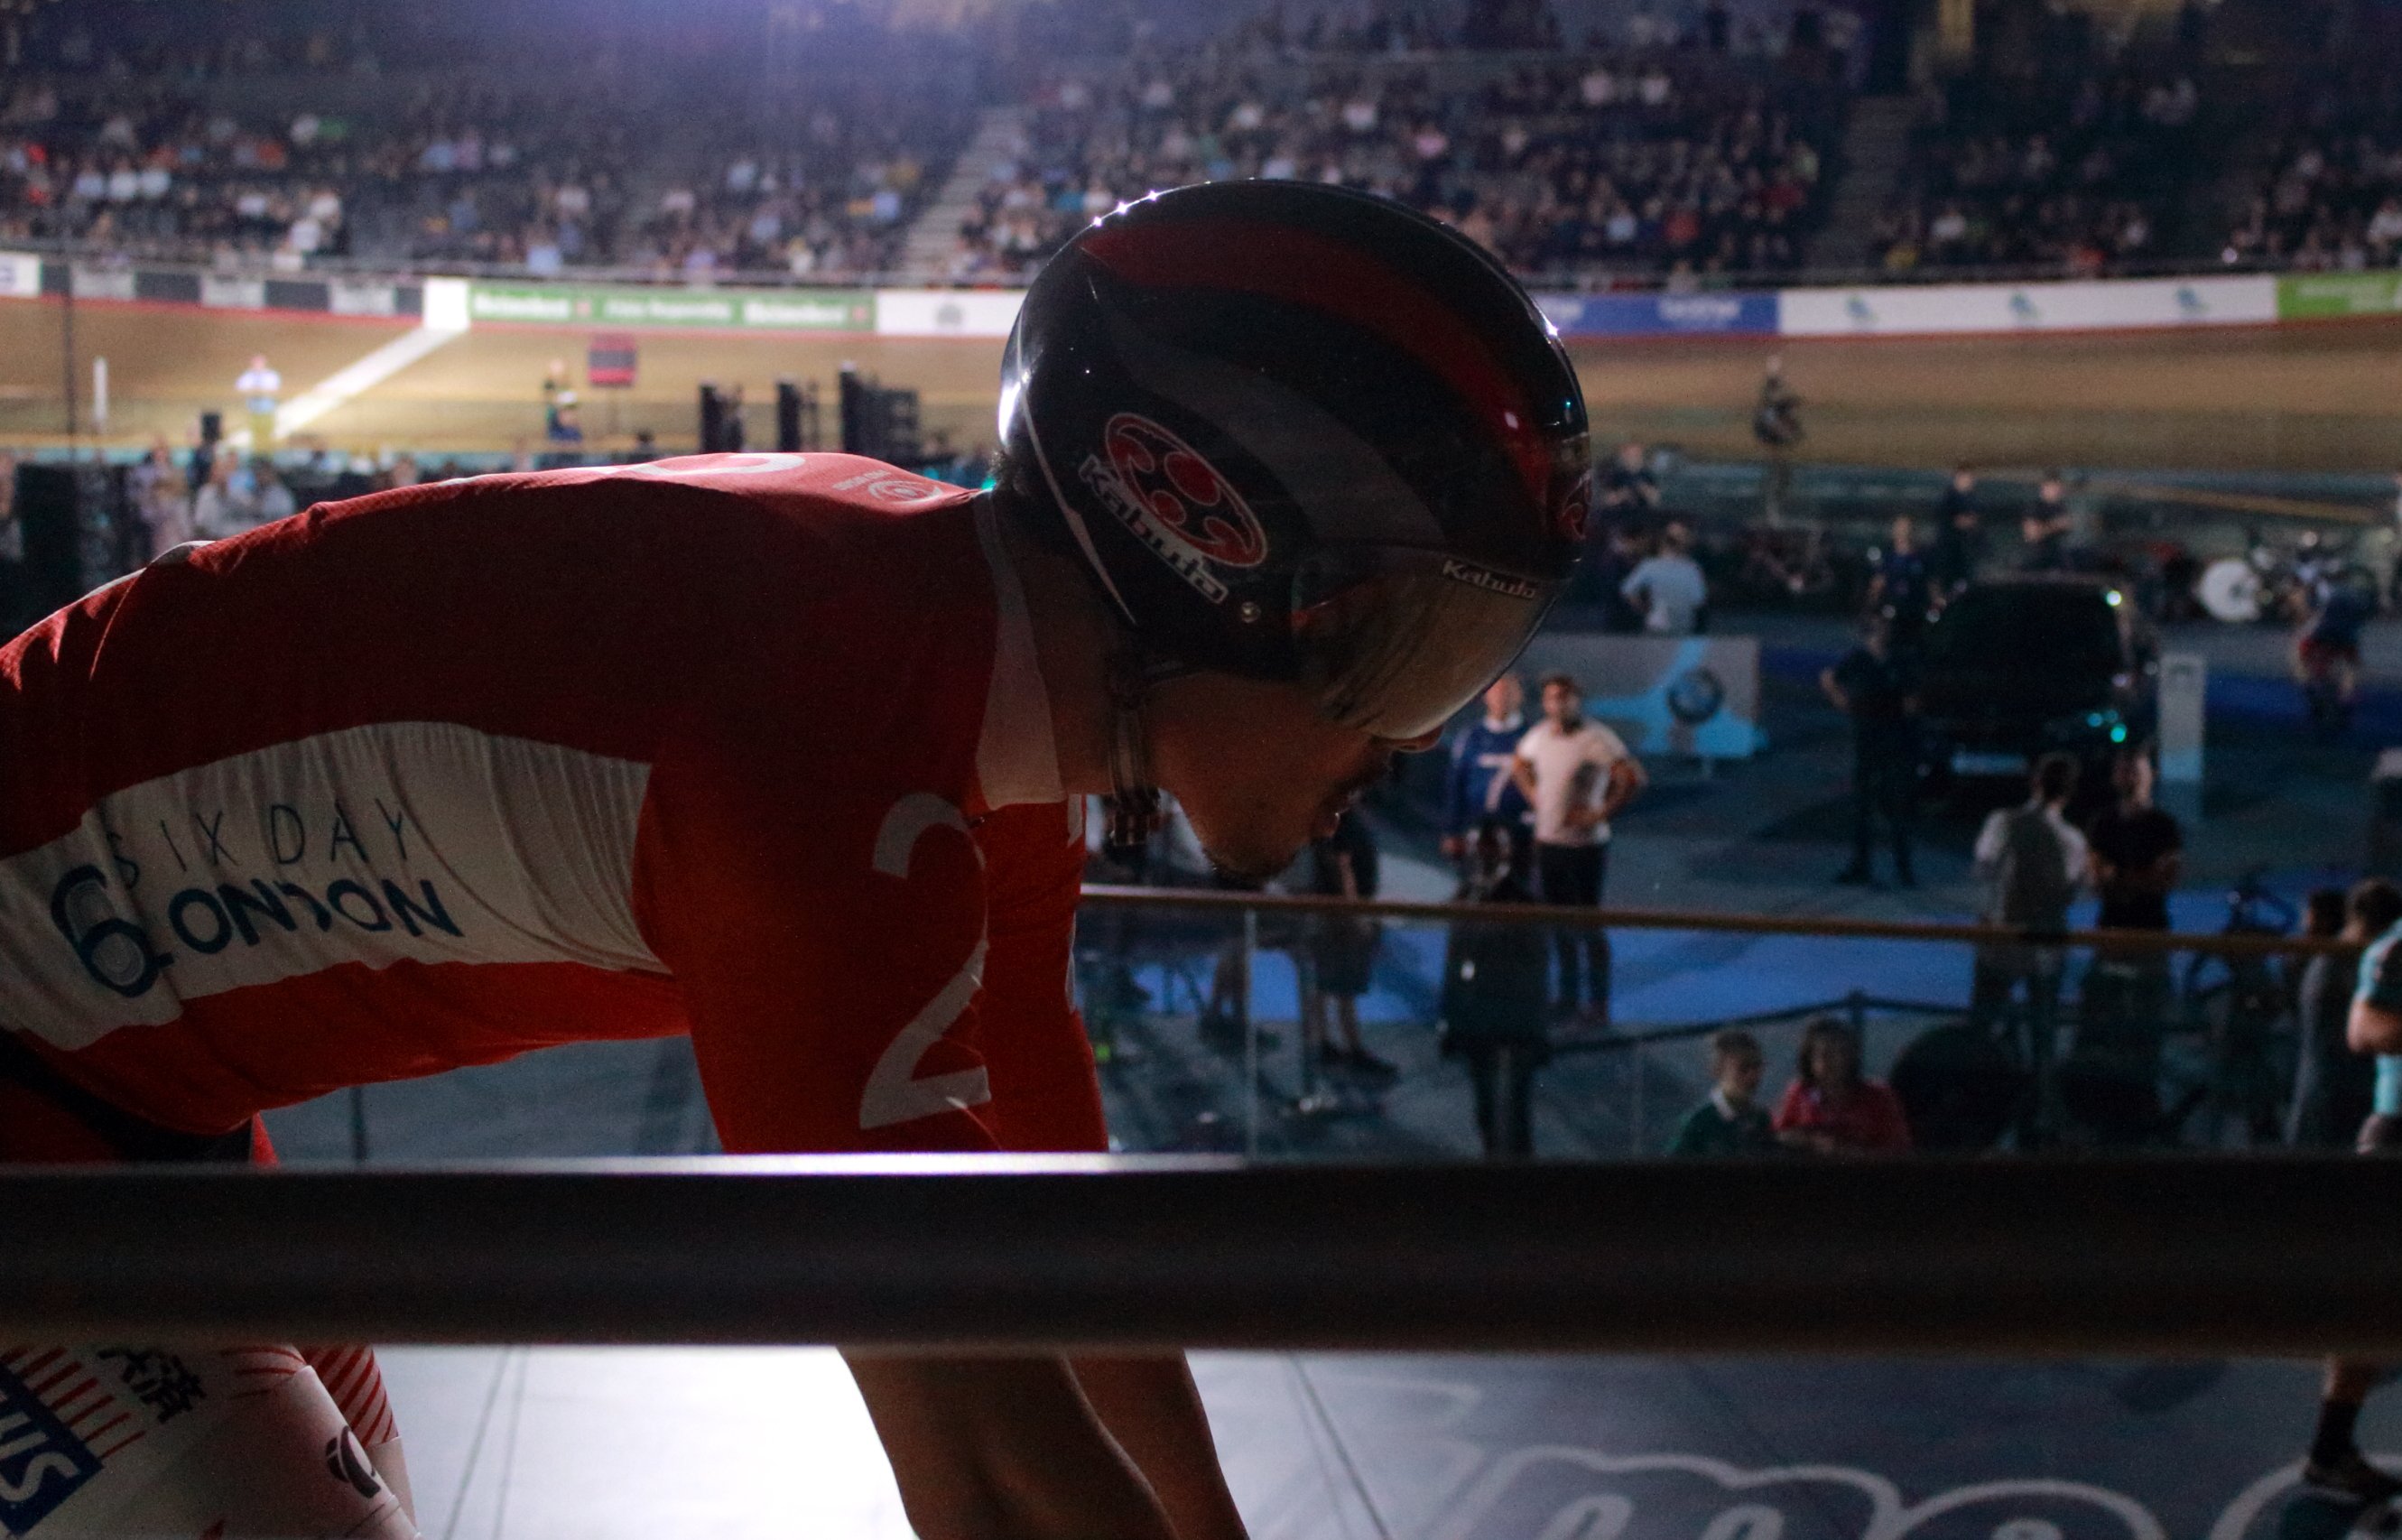 London-six-day-cycling-track-Lee-Vale-Olympic-Velodrome-2